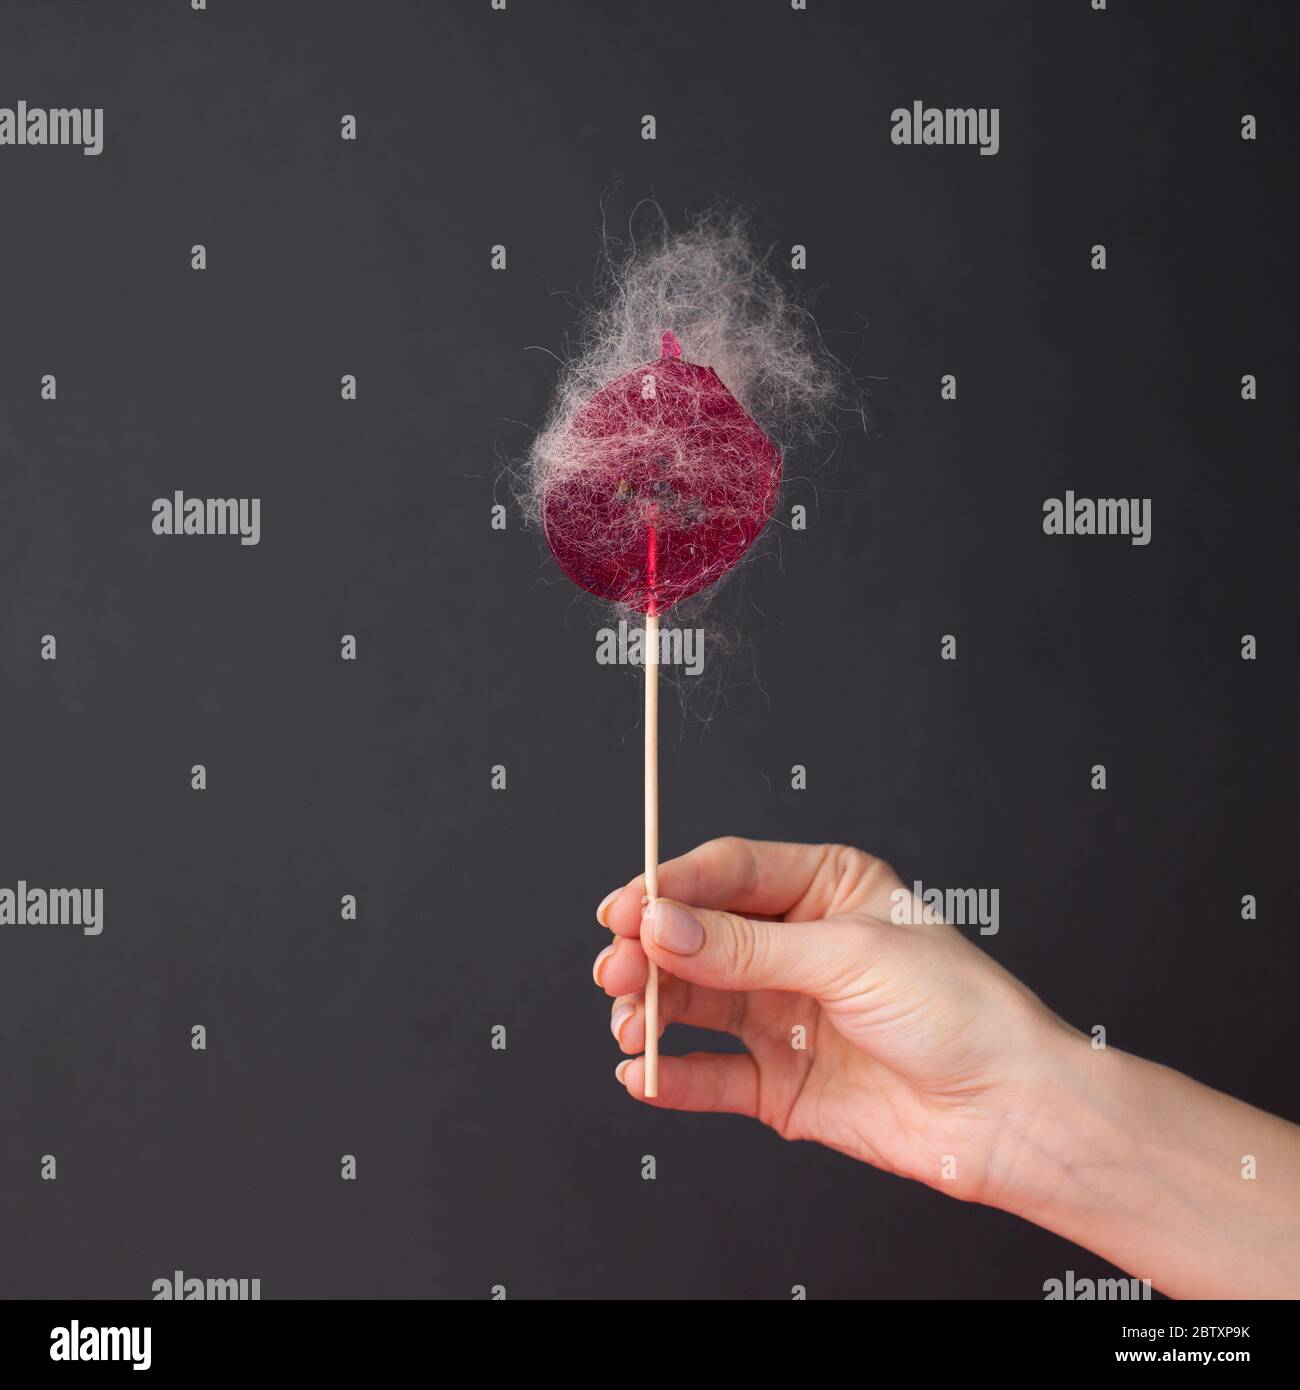 Pink lollipop with sticky hair in a female hand on black background. The concept of a beauty salon, hair removal, depilation. Sugaring, wax depilation Stock Photo